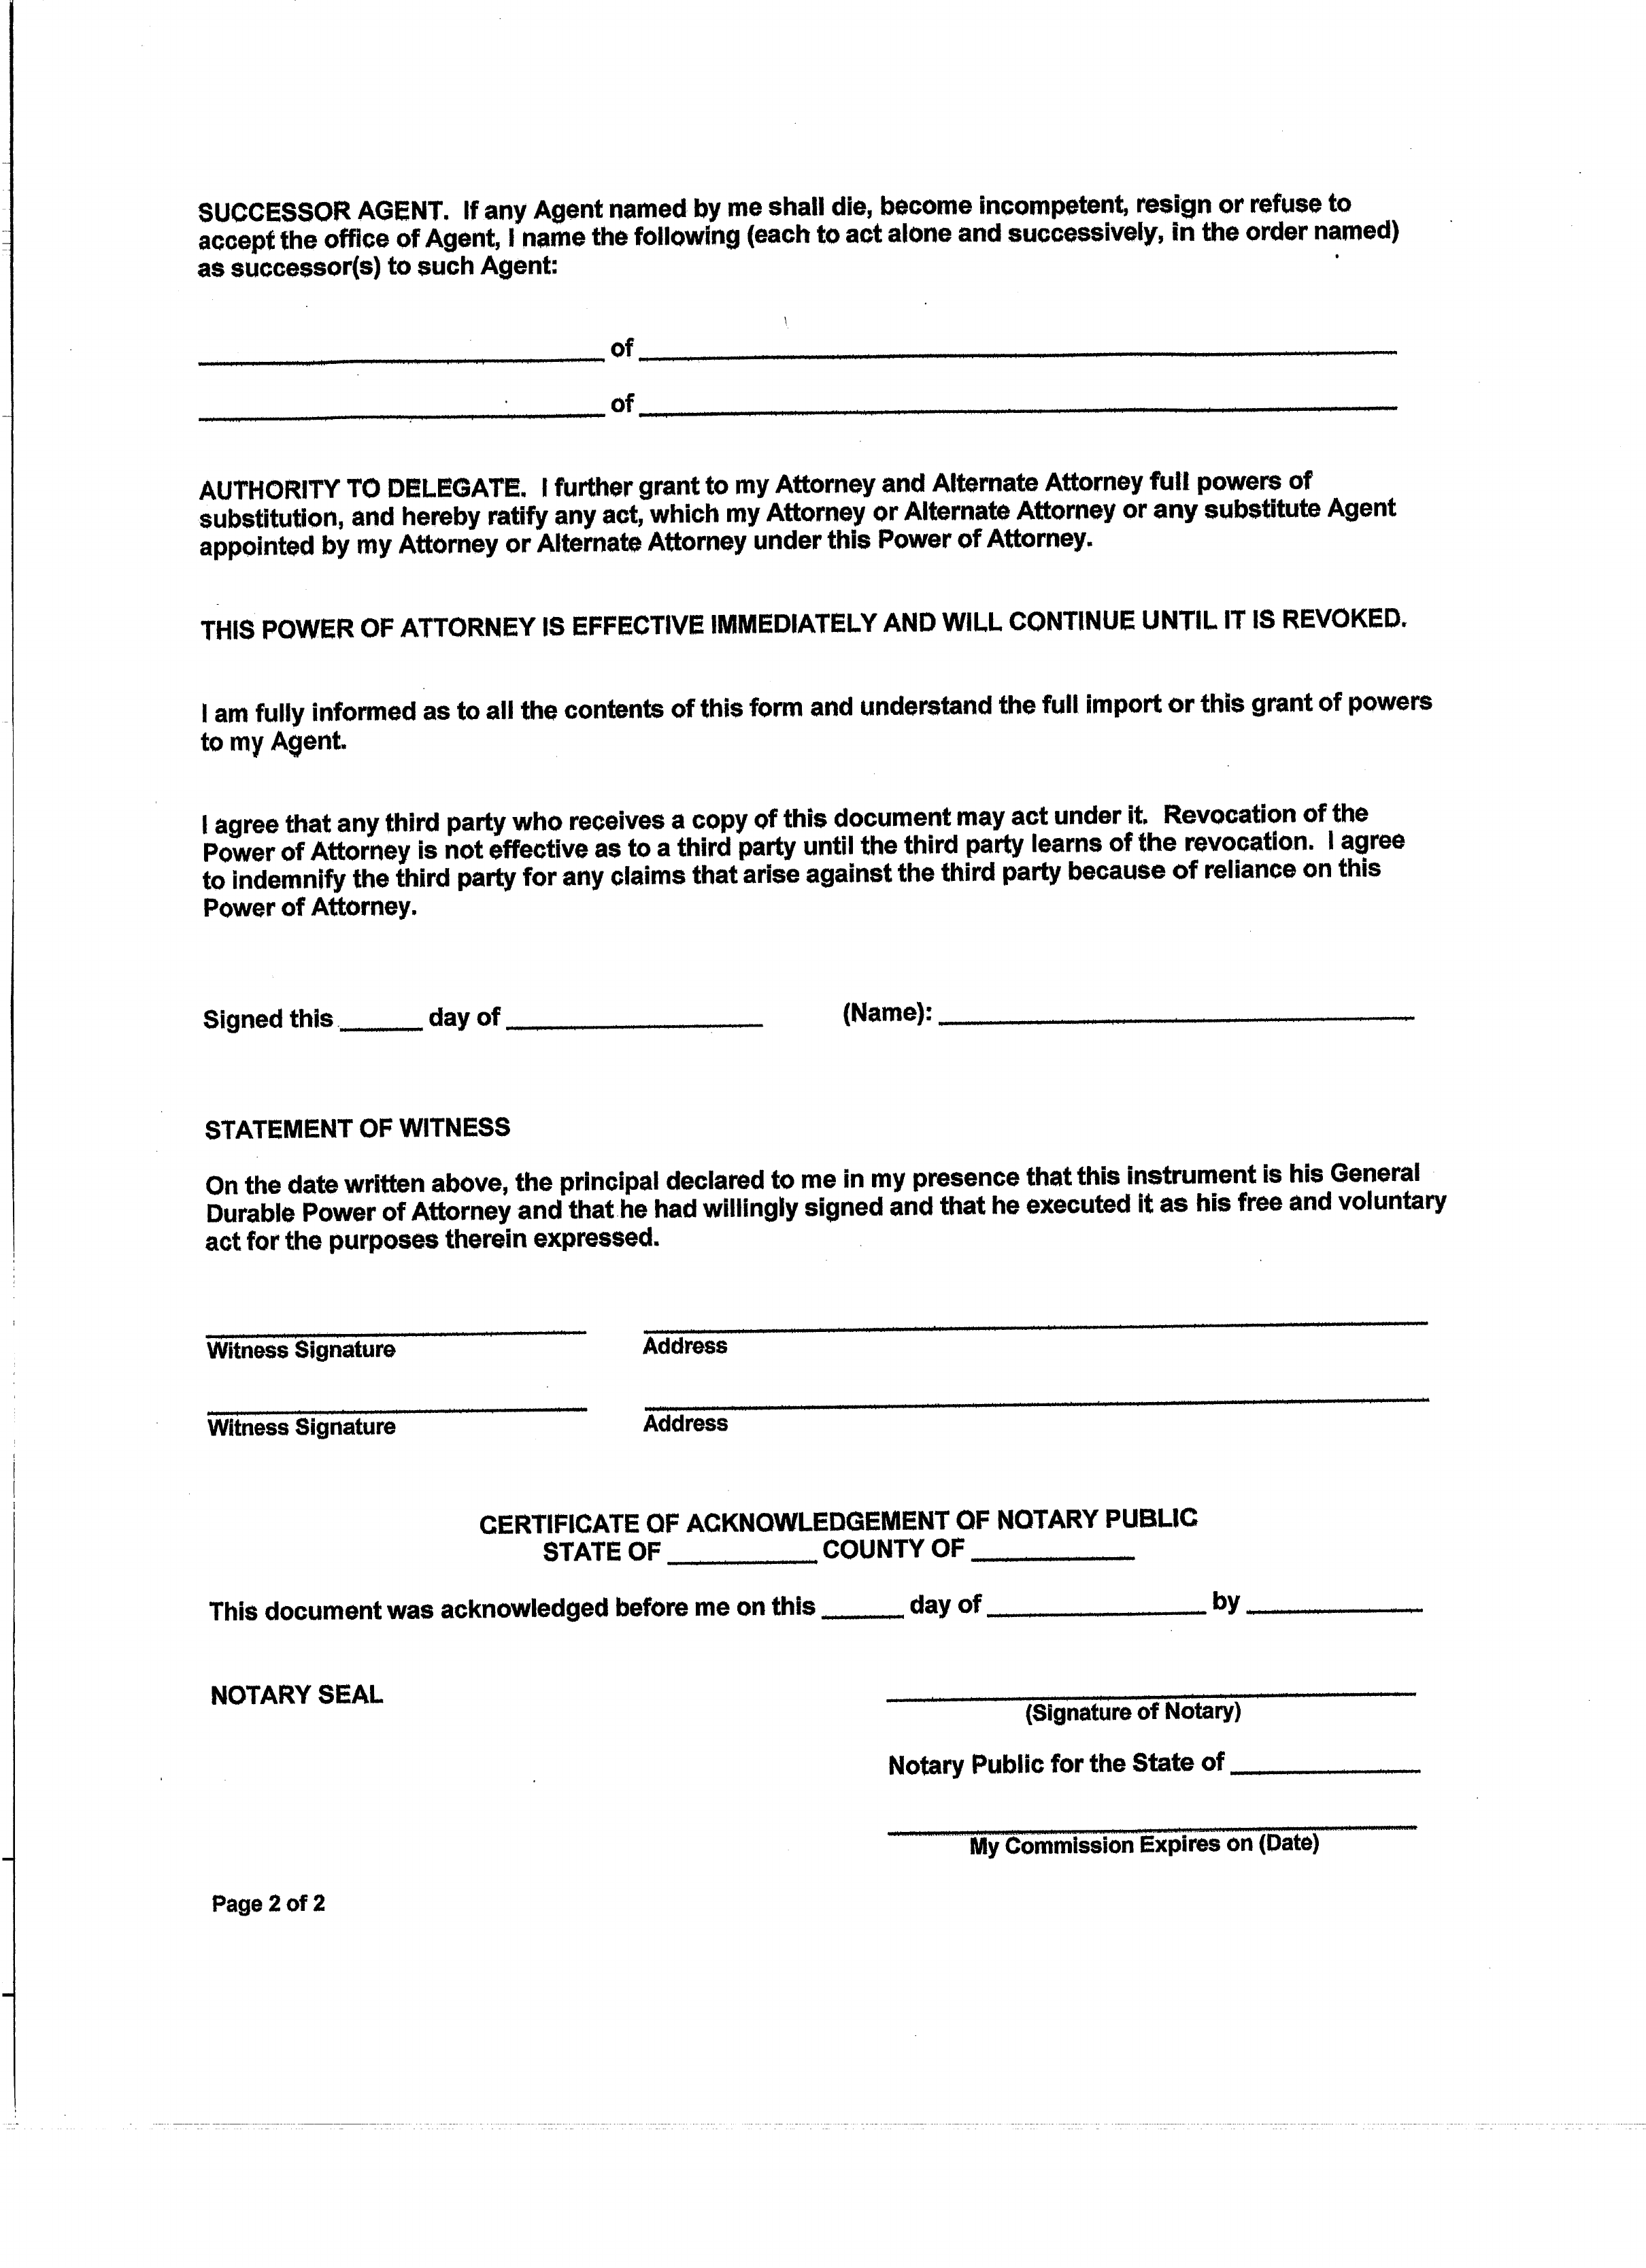 florida-power-of-attorney-templates-free-word-pdf-odt